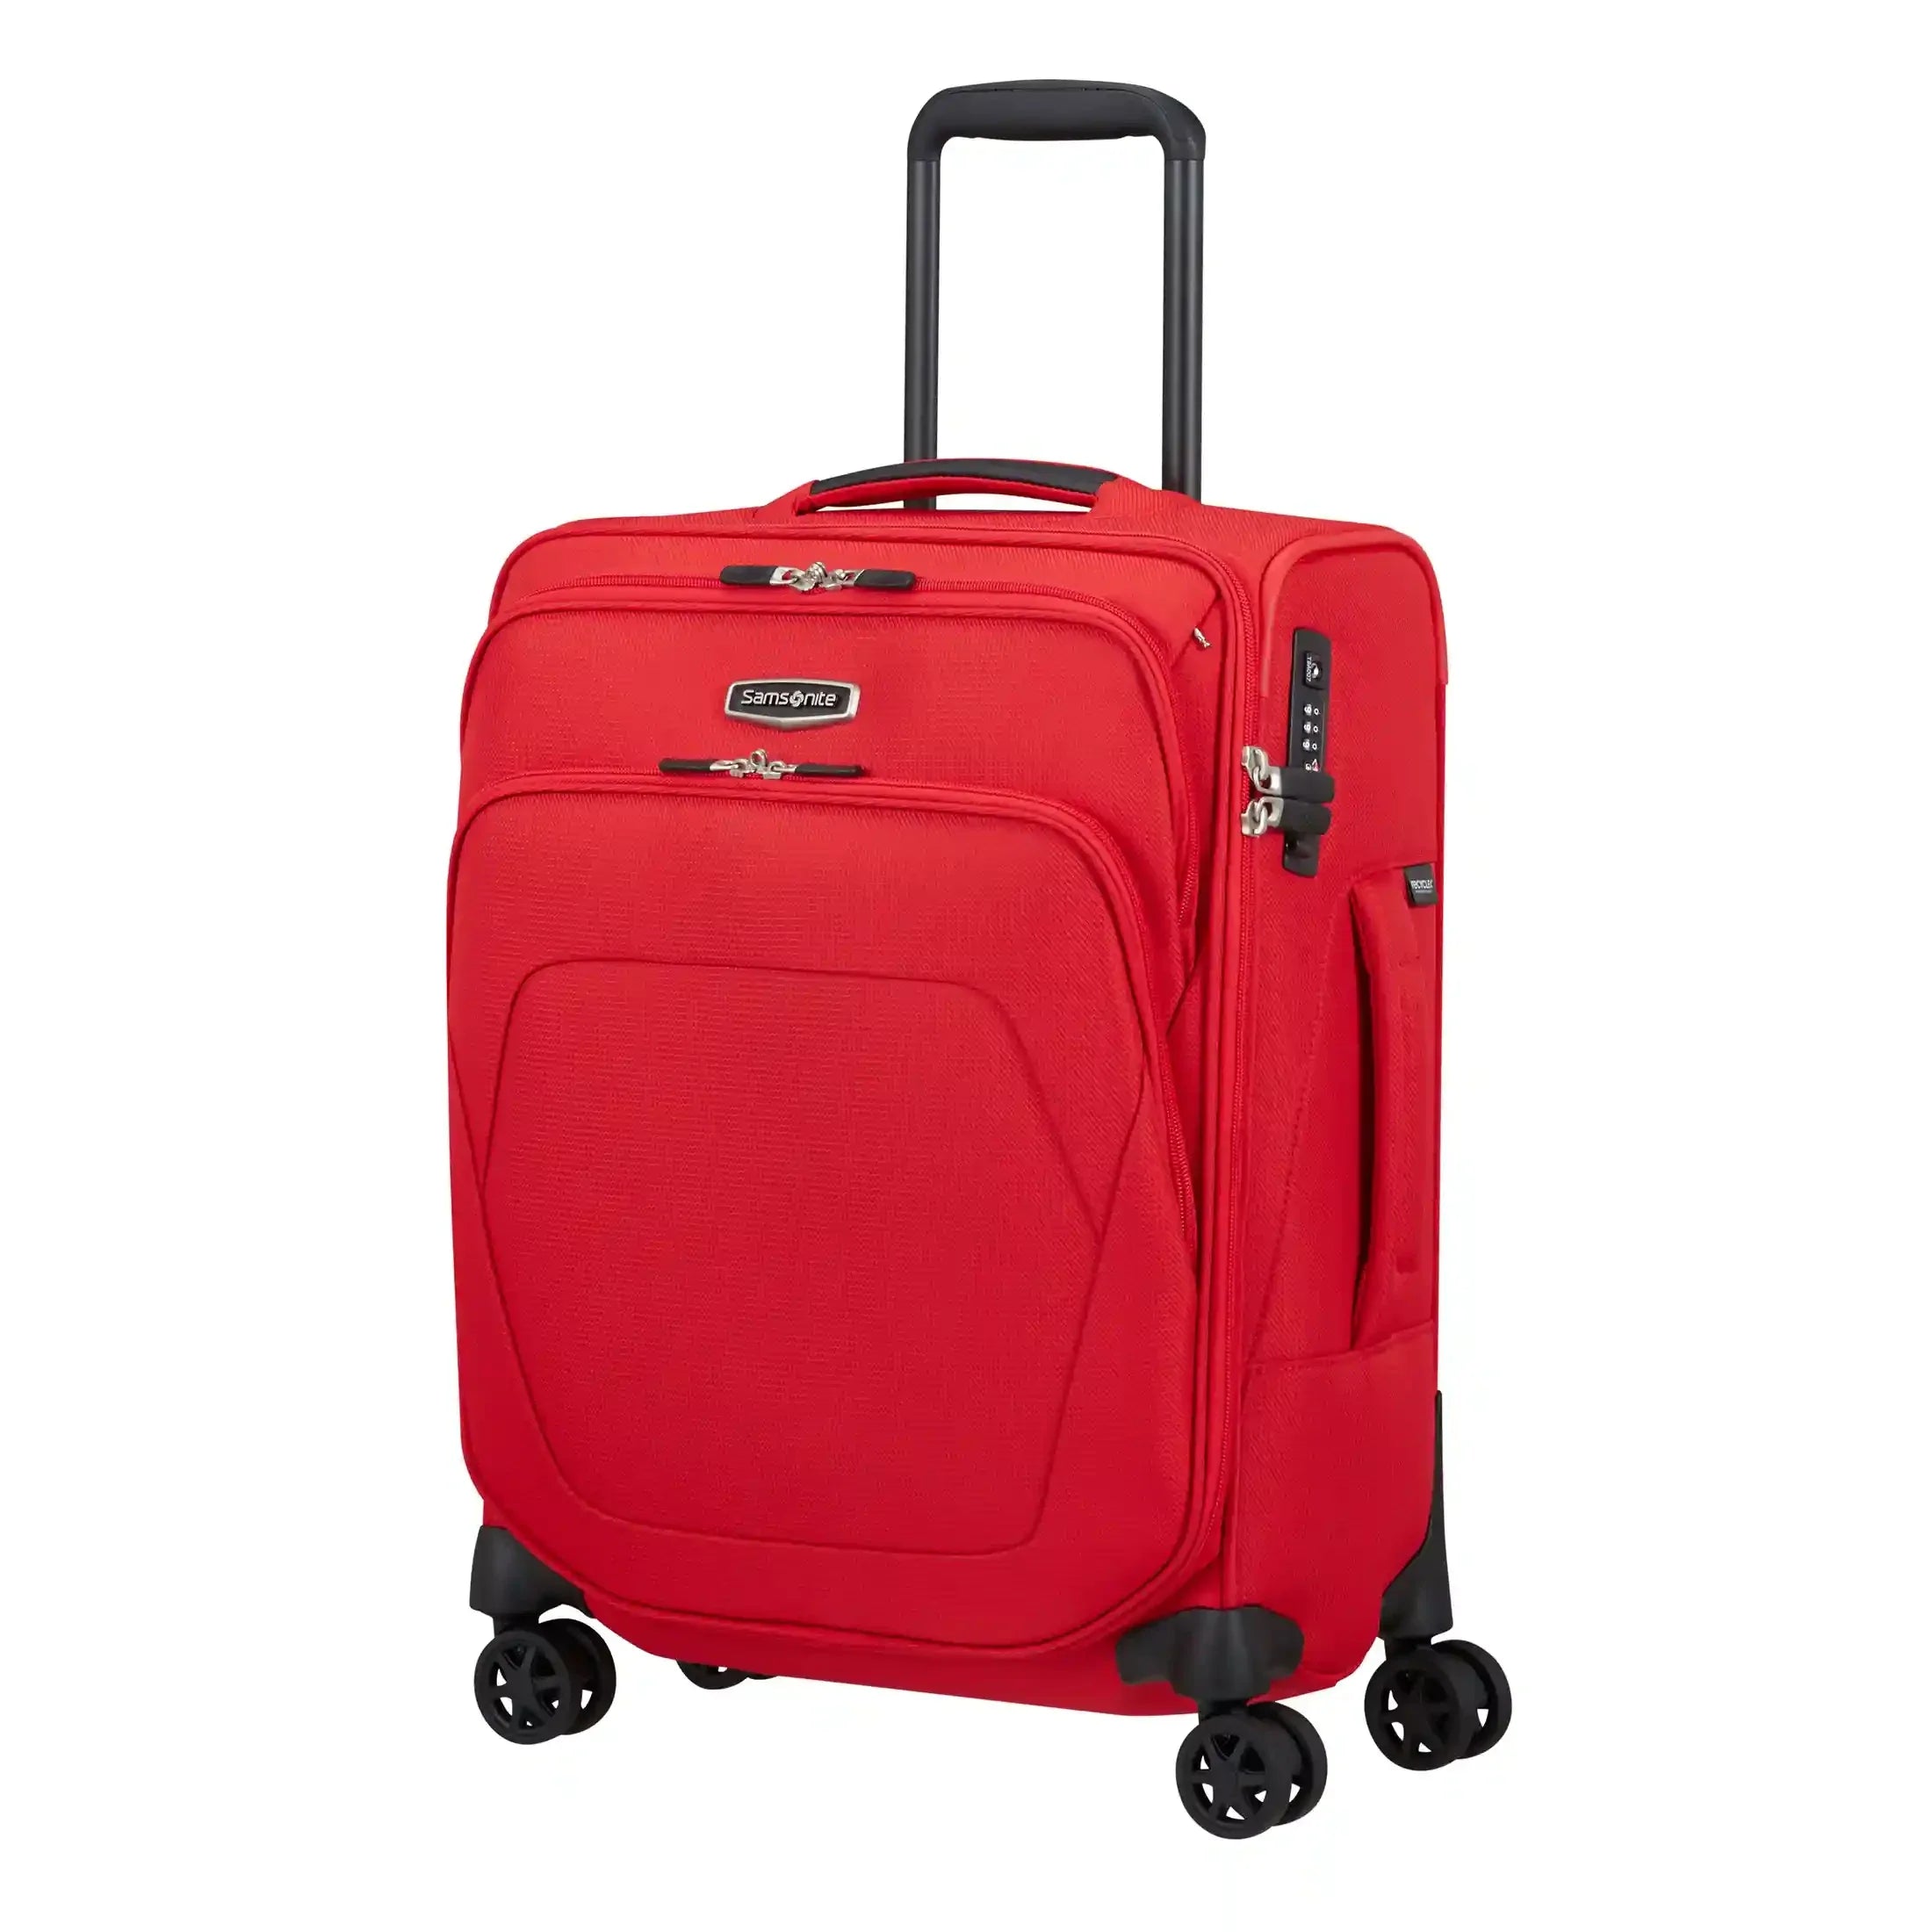 Samsonite Spark SNG ECO 4-Rollen Kabinentrolley 55 cm - fiery red